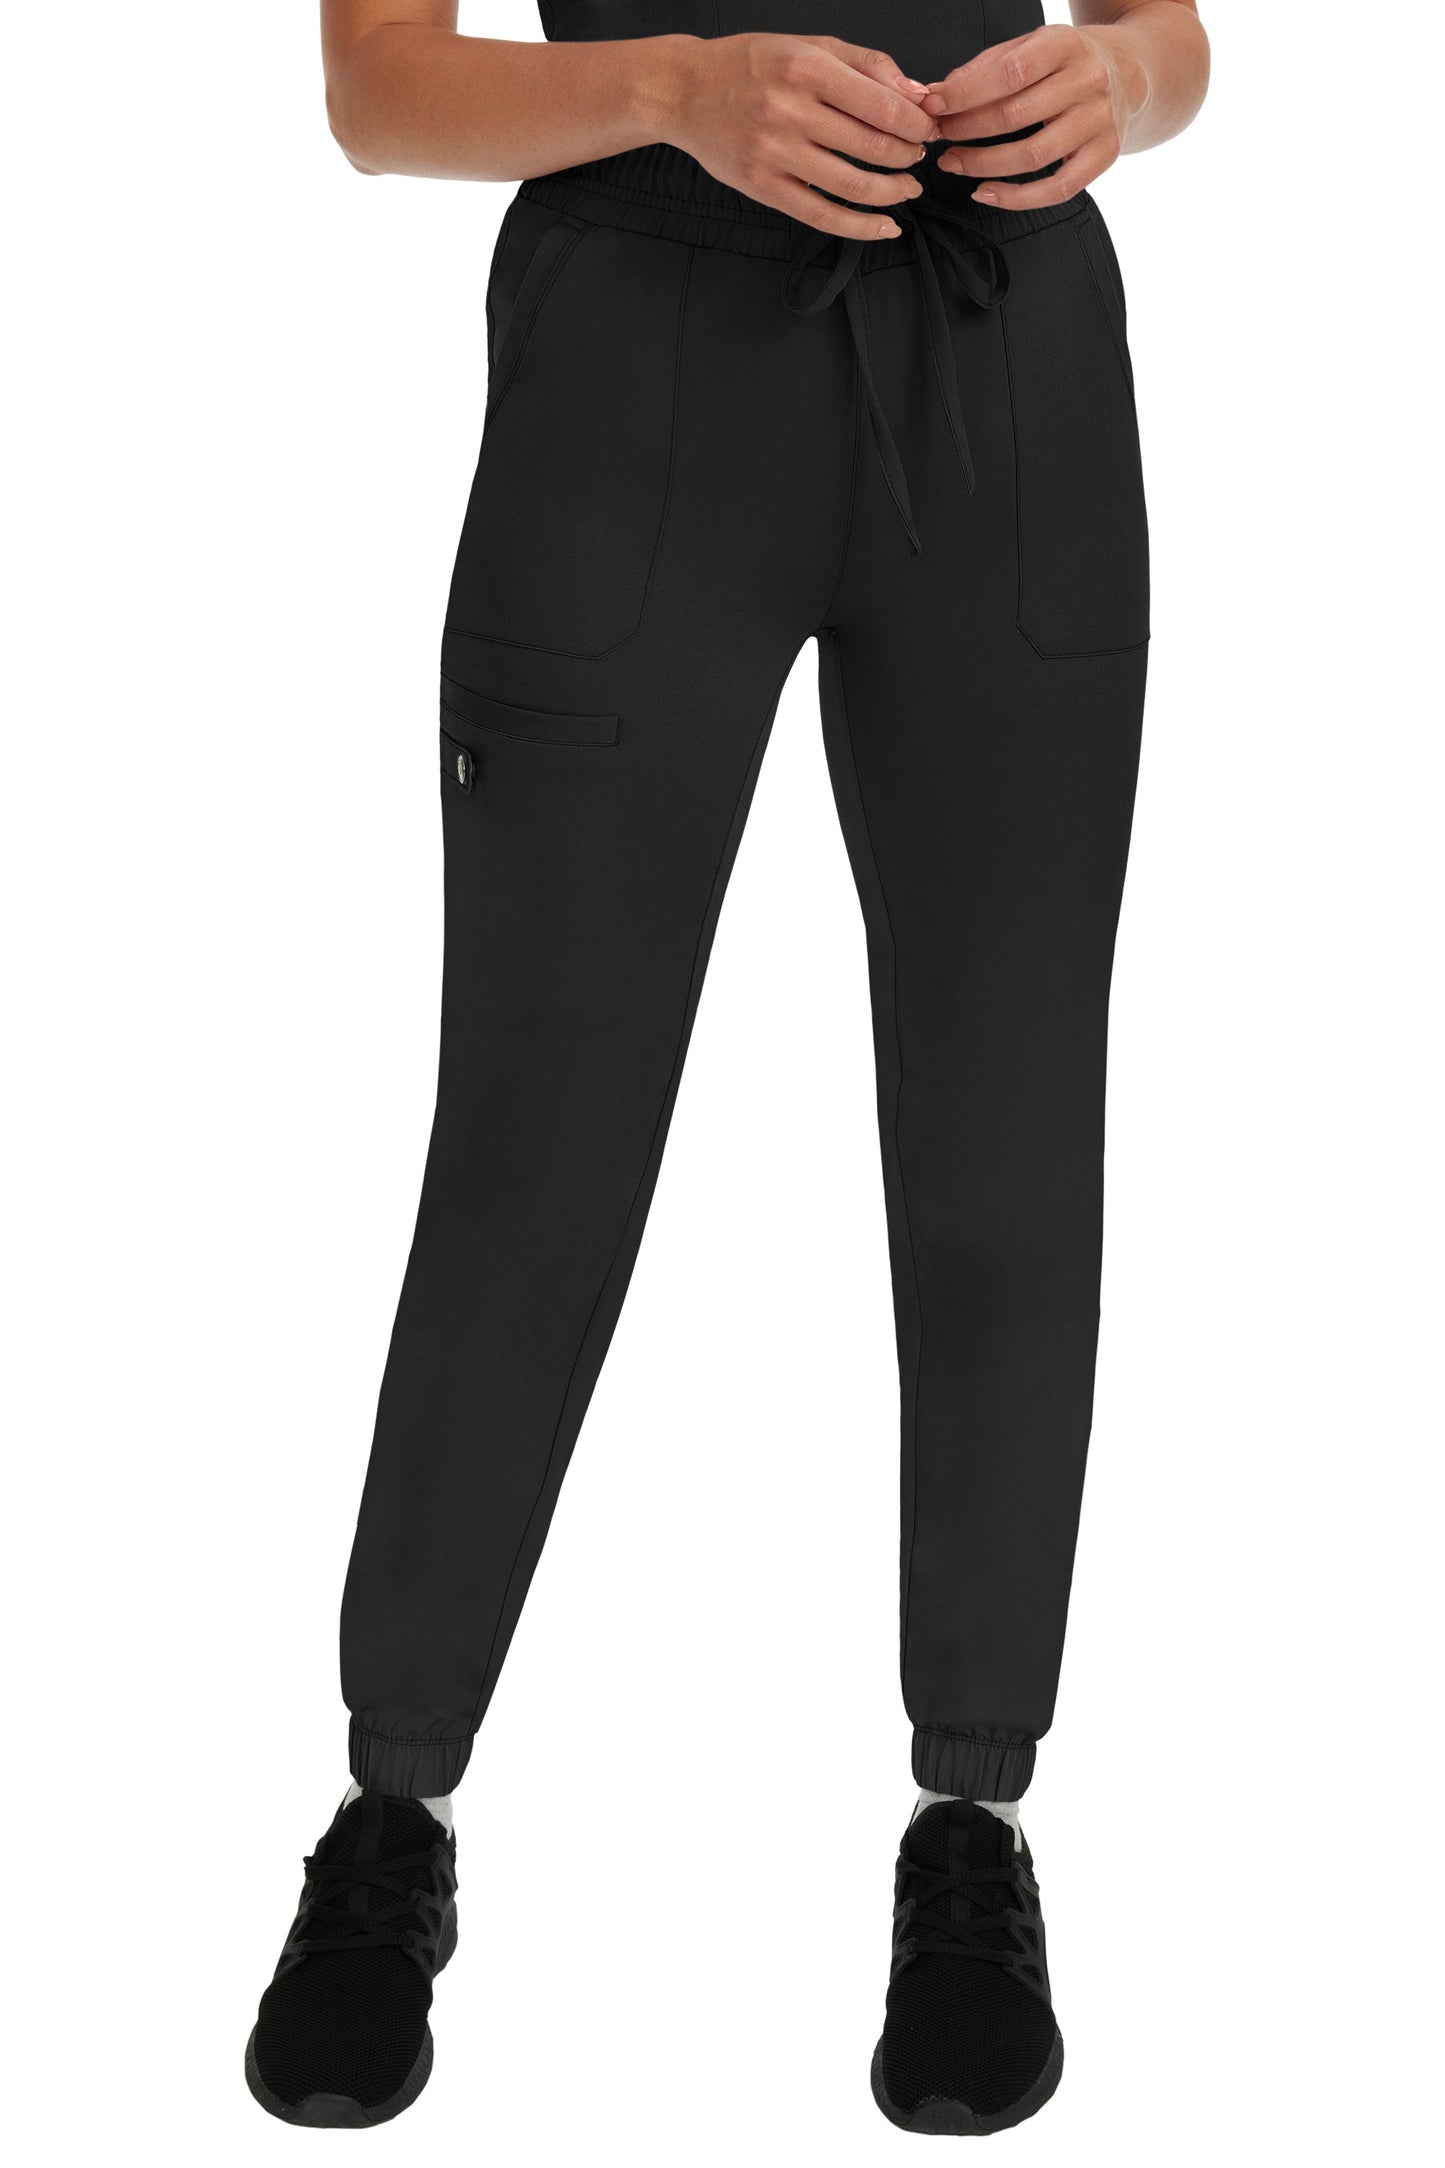 Healing Hands HH Works 9575T Tall Jogger Scrub Pant